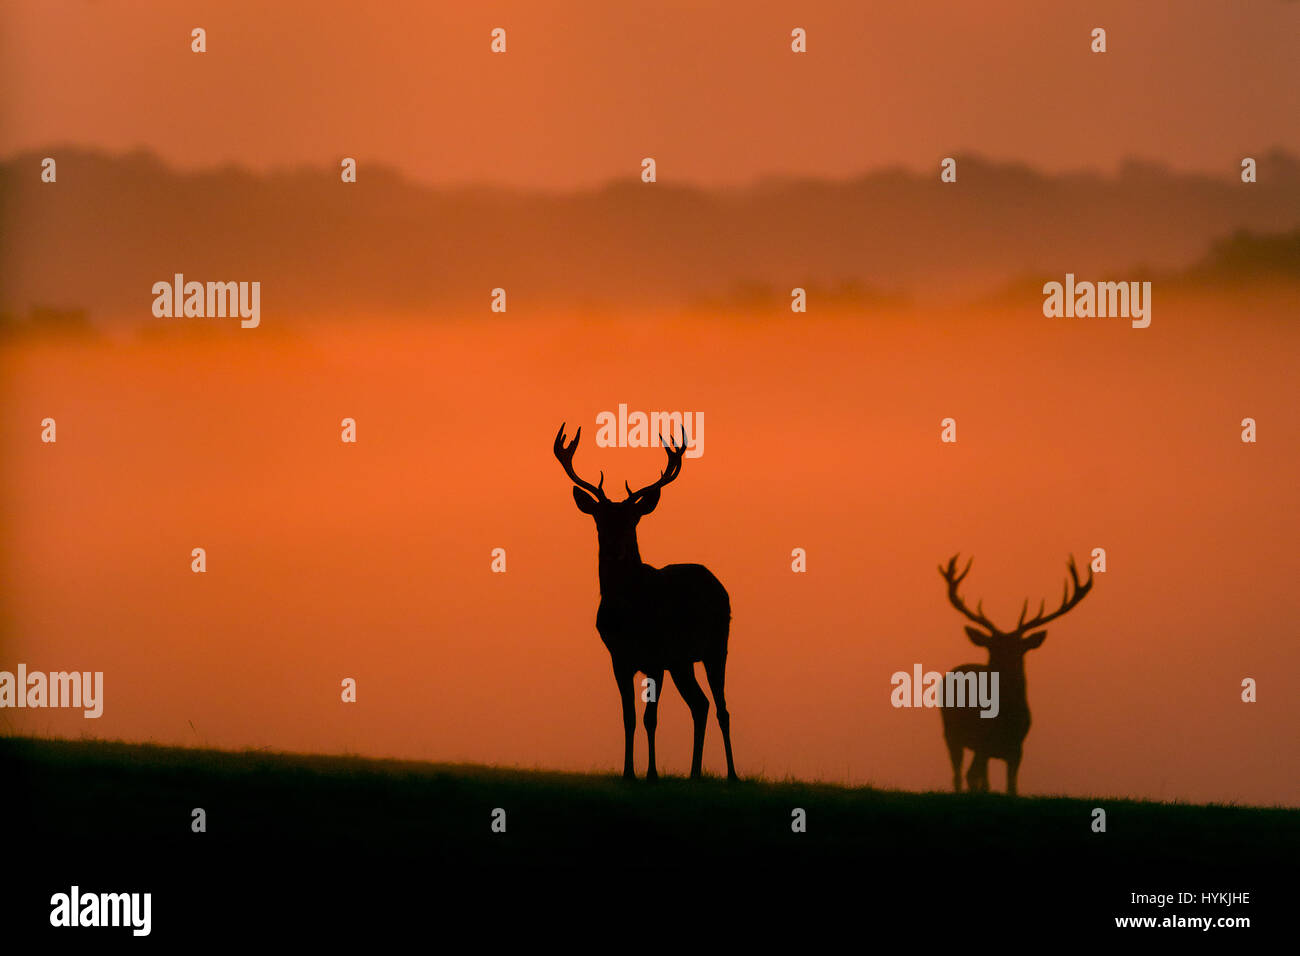 RICHMOND PARK, LONDON: HORN-TING pictures of the annual deer rut have been beautifully captured by a British graphic designer from just twenty-feet away. The photographs show action-packed rutting as well as elegant snaps of deer silhouettes at sunrise in Richmond Park, London. Other pictures show up close-up shots of expectant stags at the start of the breeding season. Graphic designer Mark Bridger (47) got up at 5am to travel from his home in Kent to the deer-packed location just yards from the busy streets of London and spent four-and-a-half hours capturing these exciting shots. Stock Photo